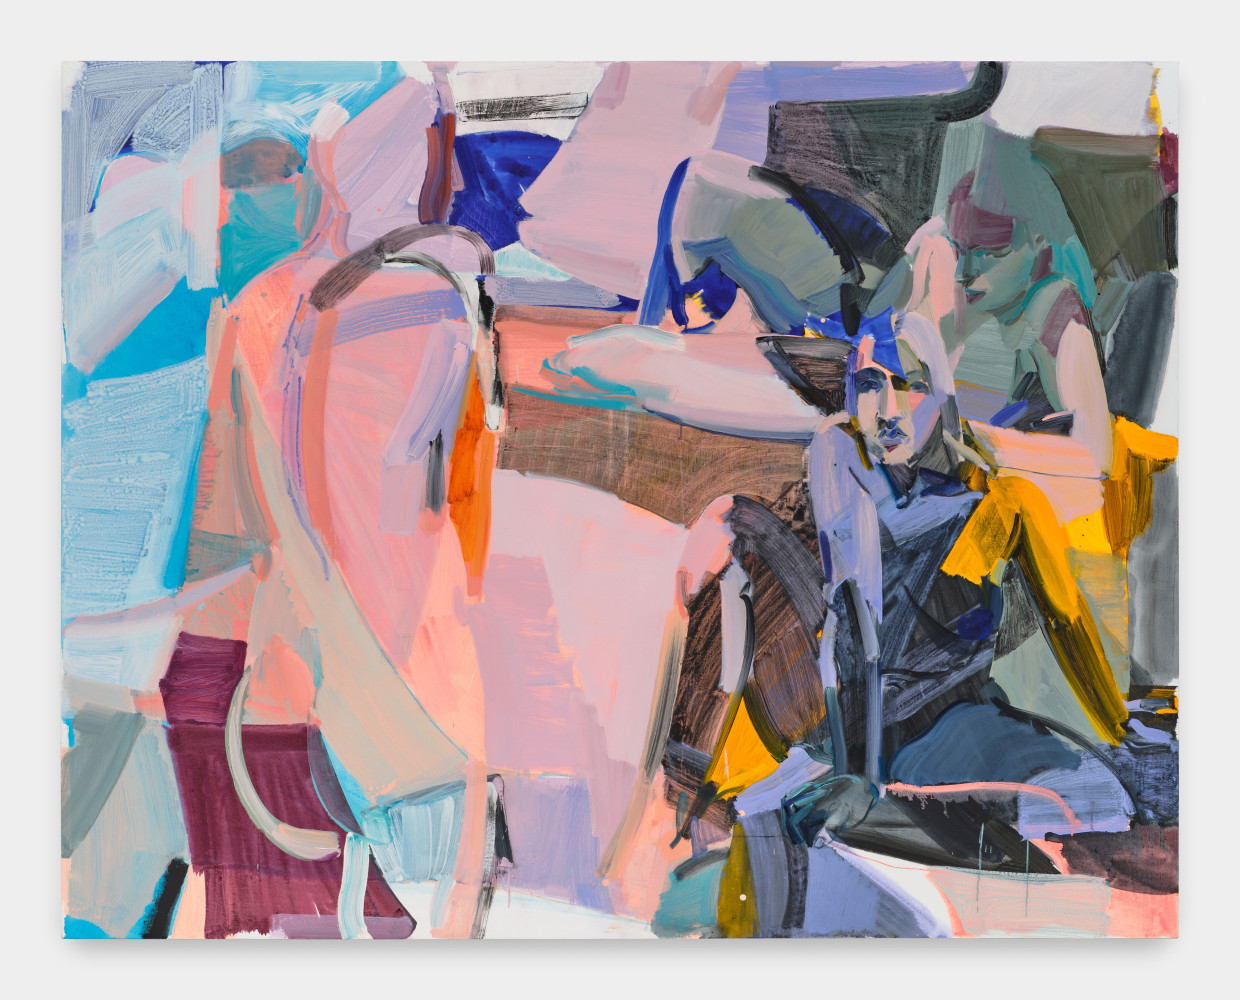 Loose geometric swatches of lapis, pink, lavender, ochre, burgundy and navy blues comprise an abstract space with a reclining figure, a seated figure and a standing figure.